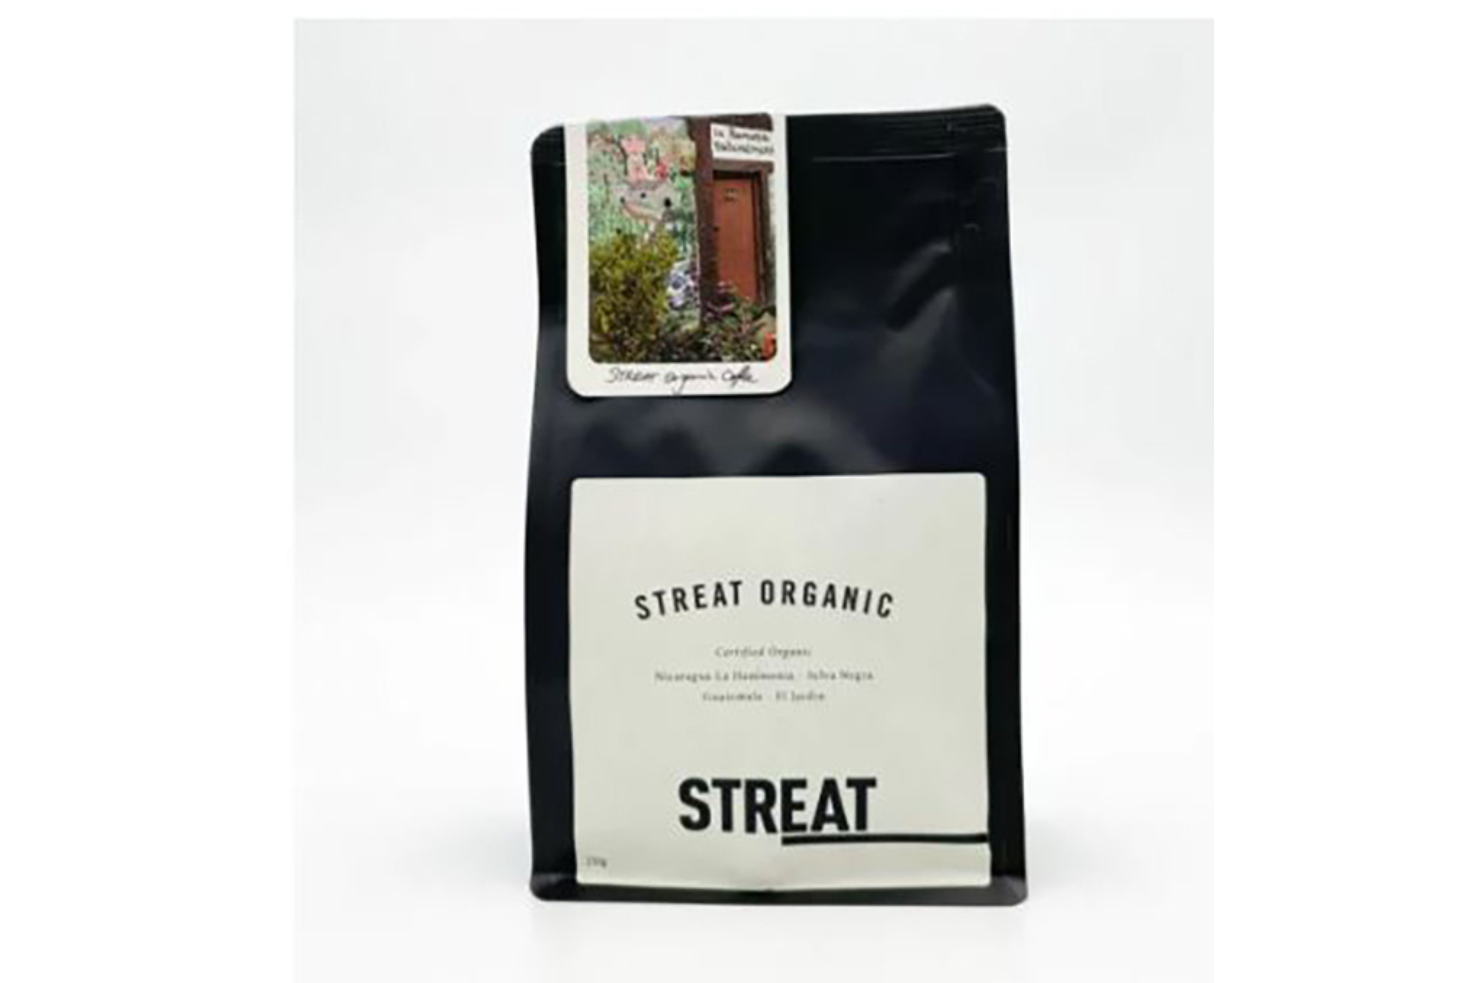 Our new coffee range has dropped!